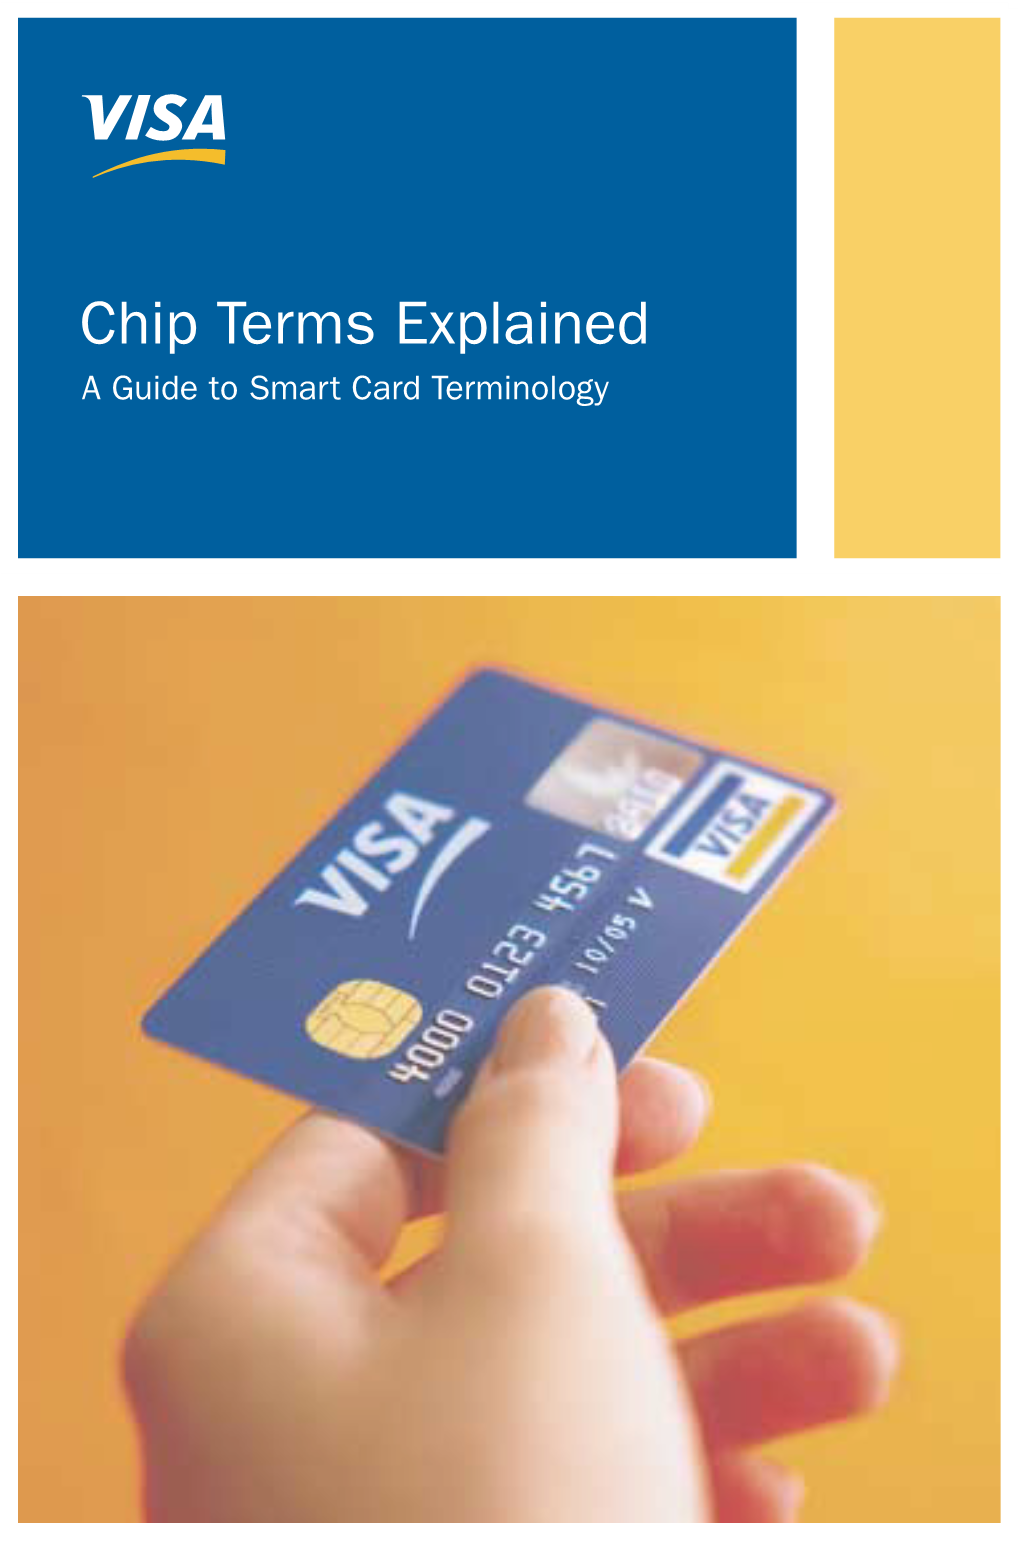 Chip Terms Explained a Guide to Smart Card Terminology Contents